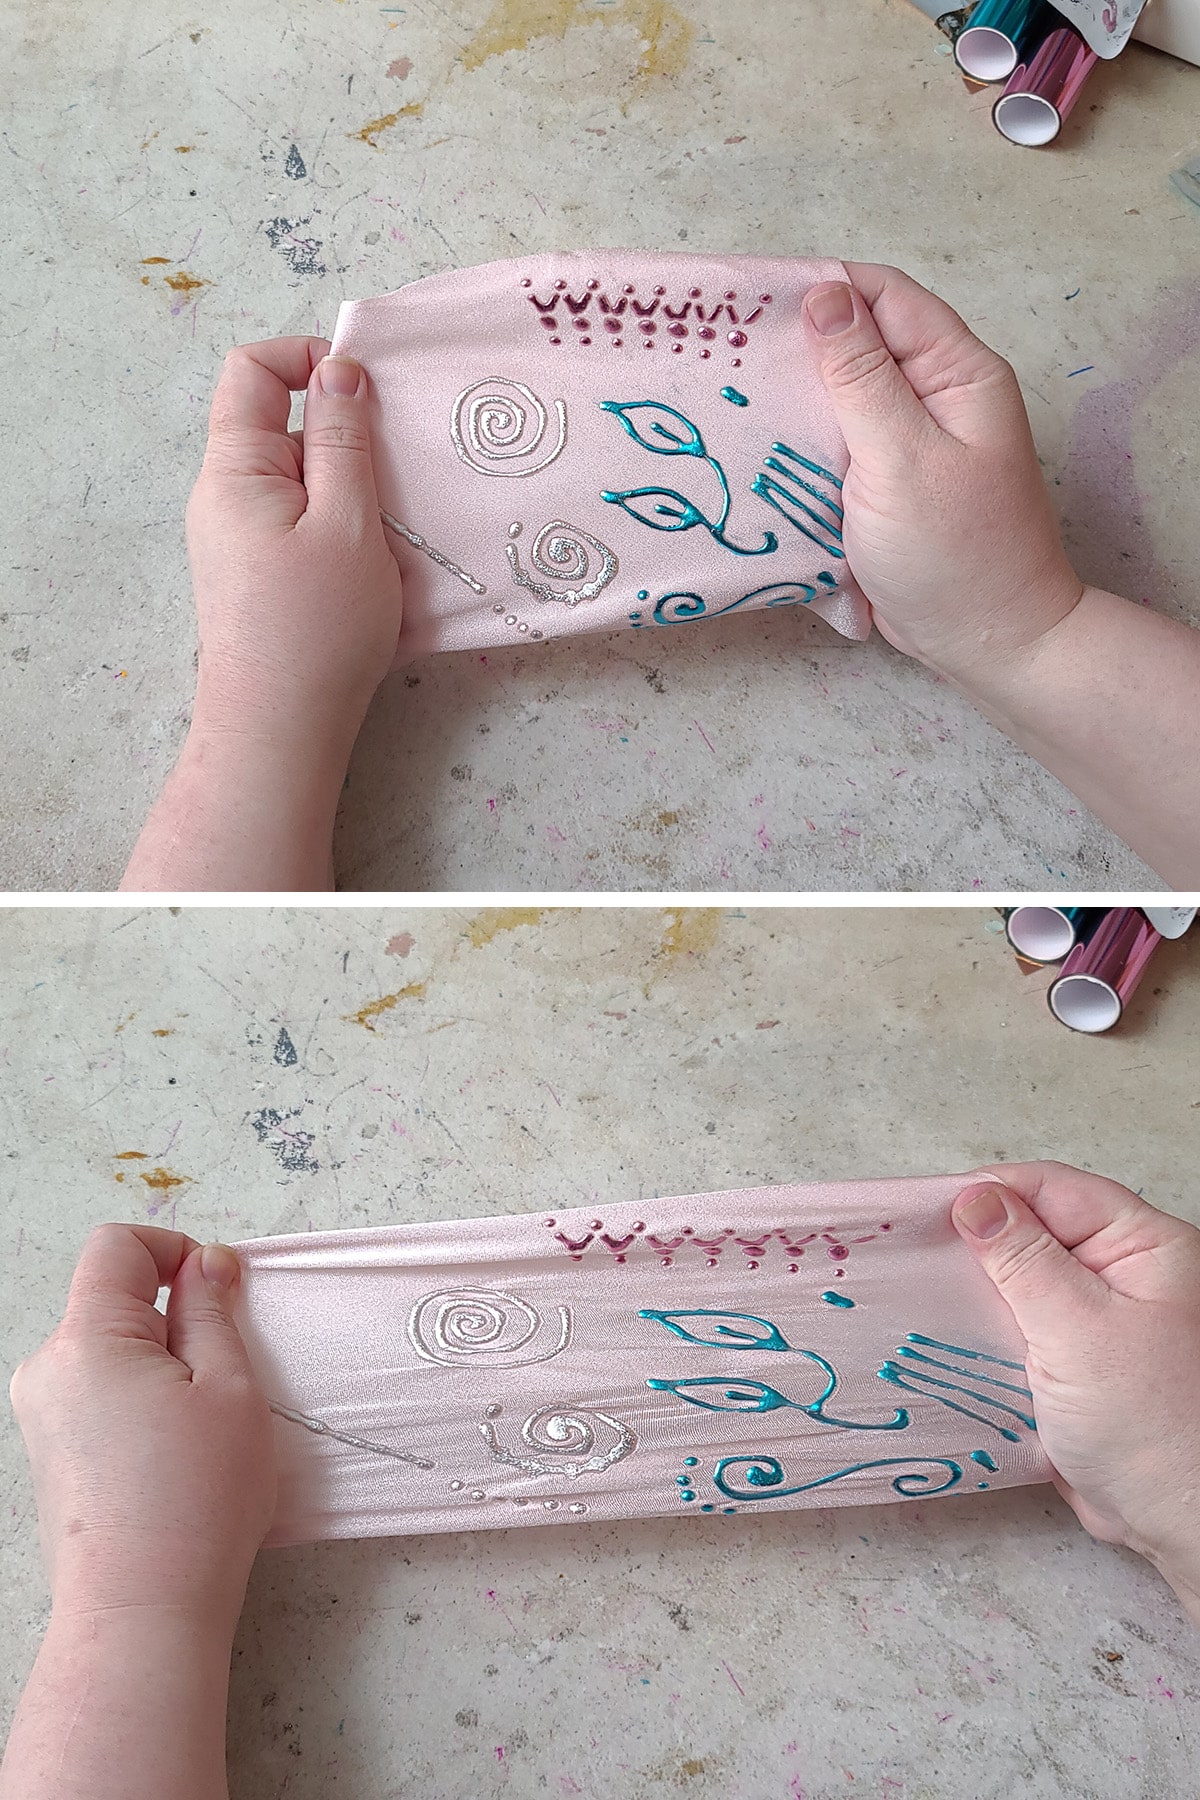 A two part image showing hands holding a piece of pale pink spandex with foil designs on it, first unstretched, then stretching it to its limit.